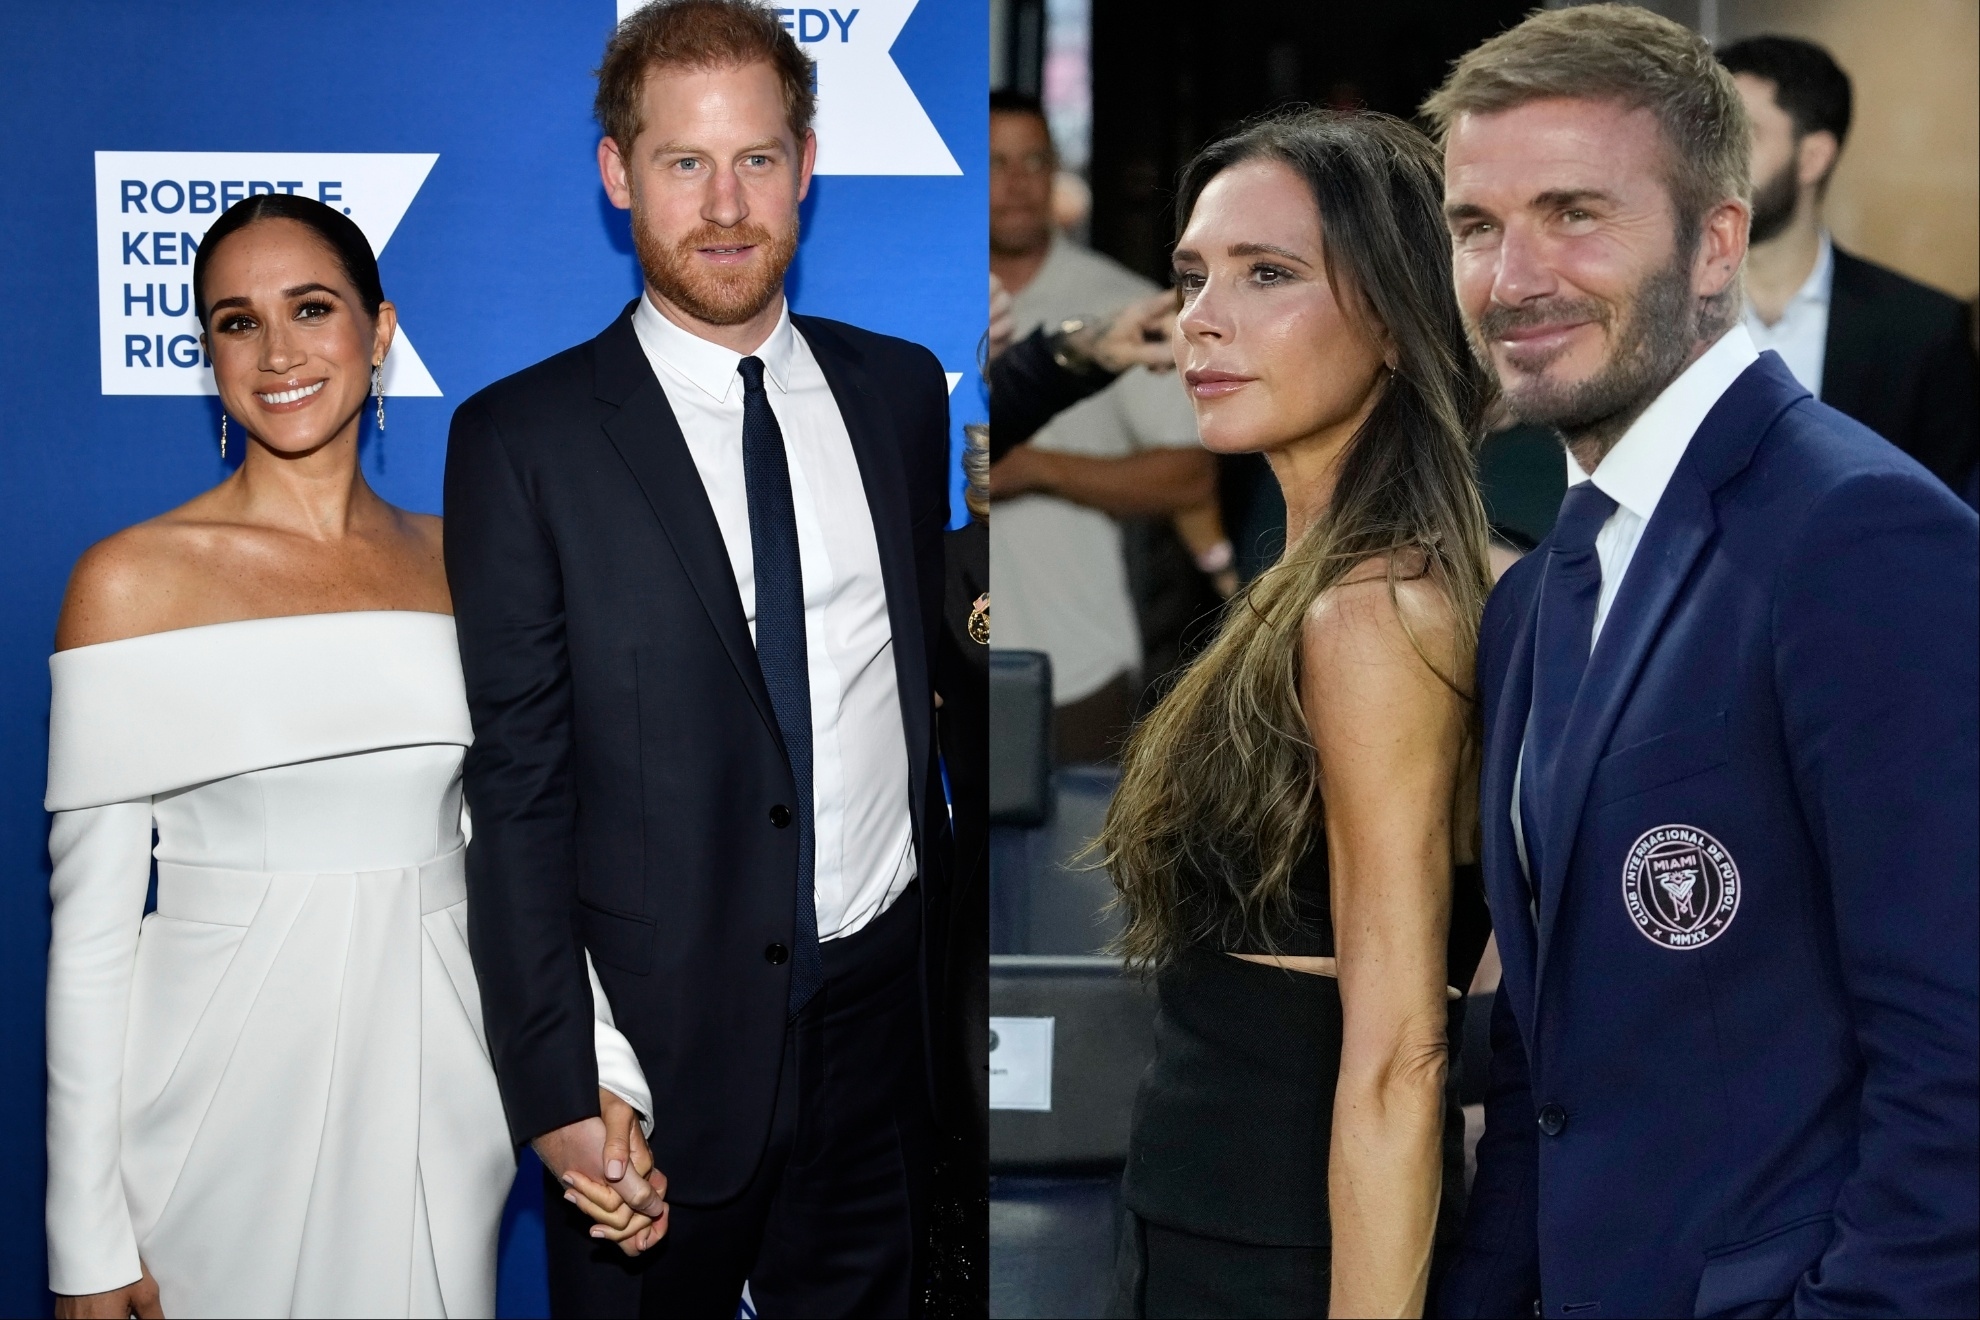 Mashup image of the Sussexes and the Beckhams.